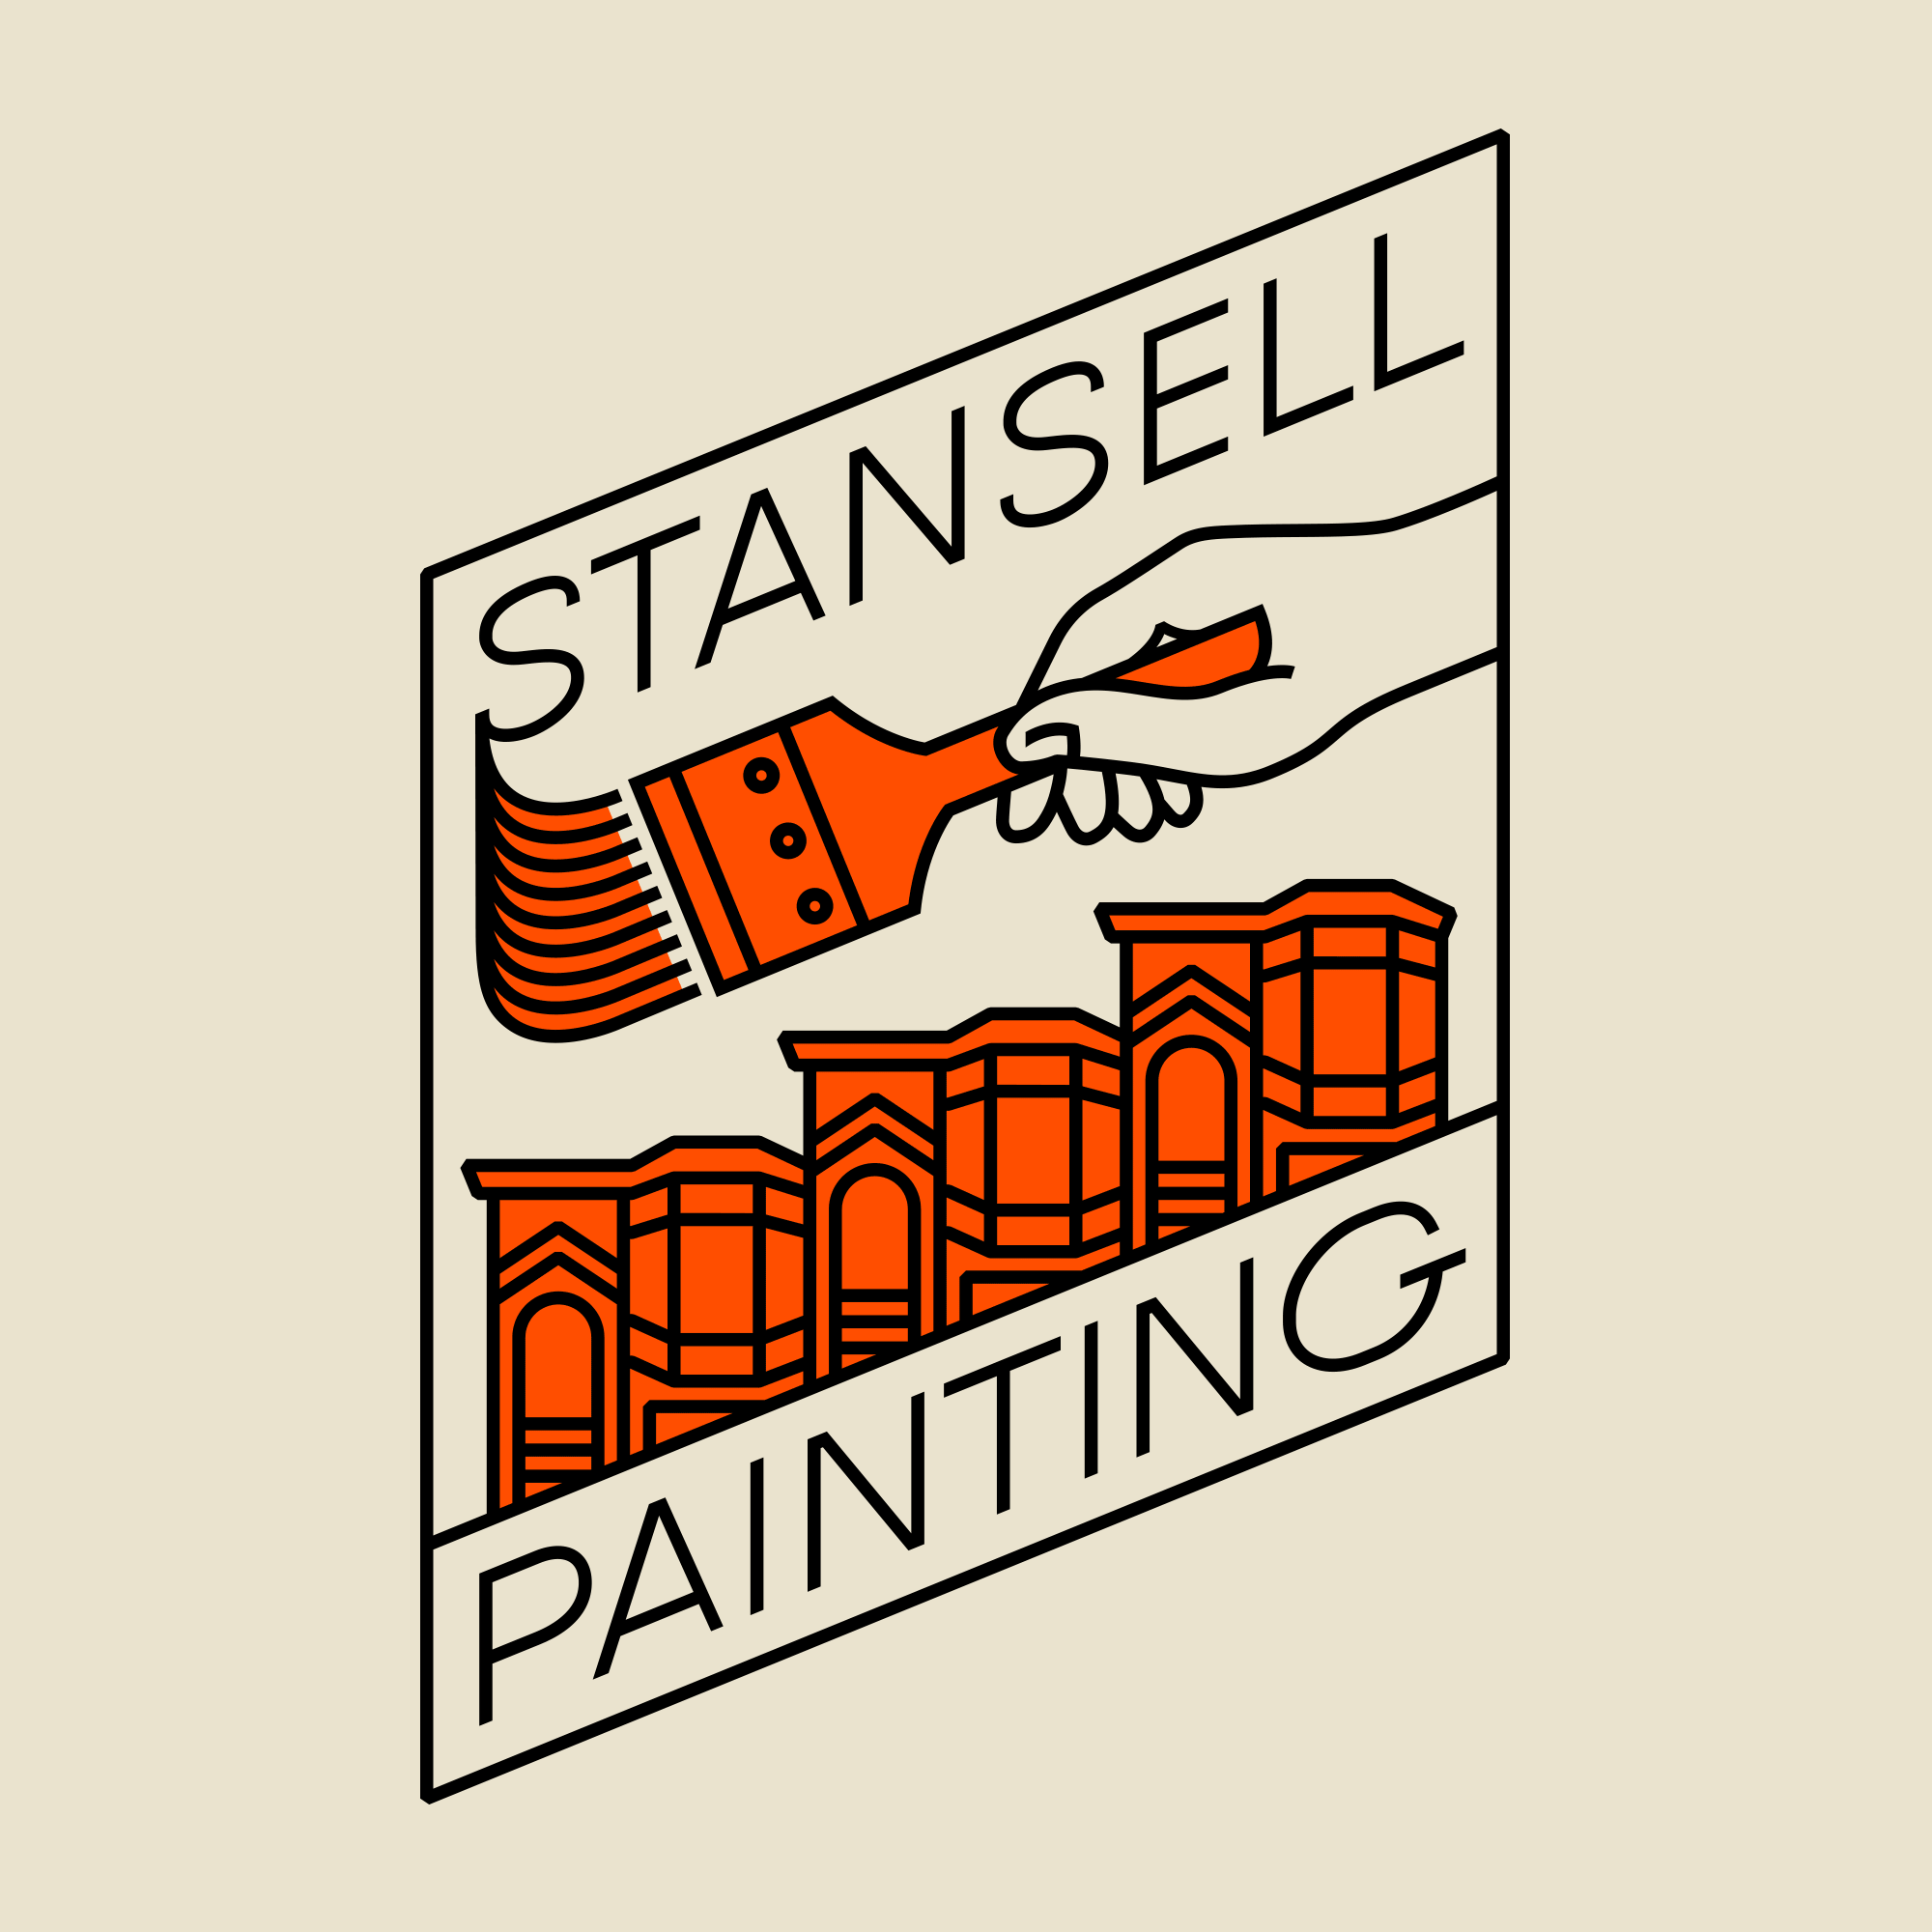 Monoweight illustrated logo for Stansell Painting featuring a hand holding a brush and a row of San Francisco Victorian houses on a hill